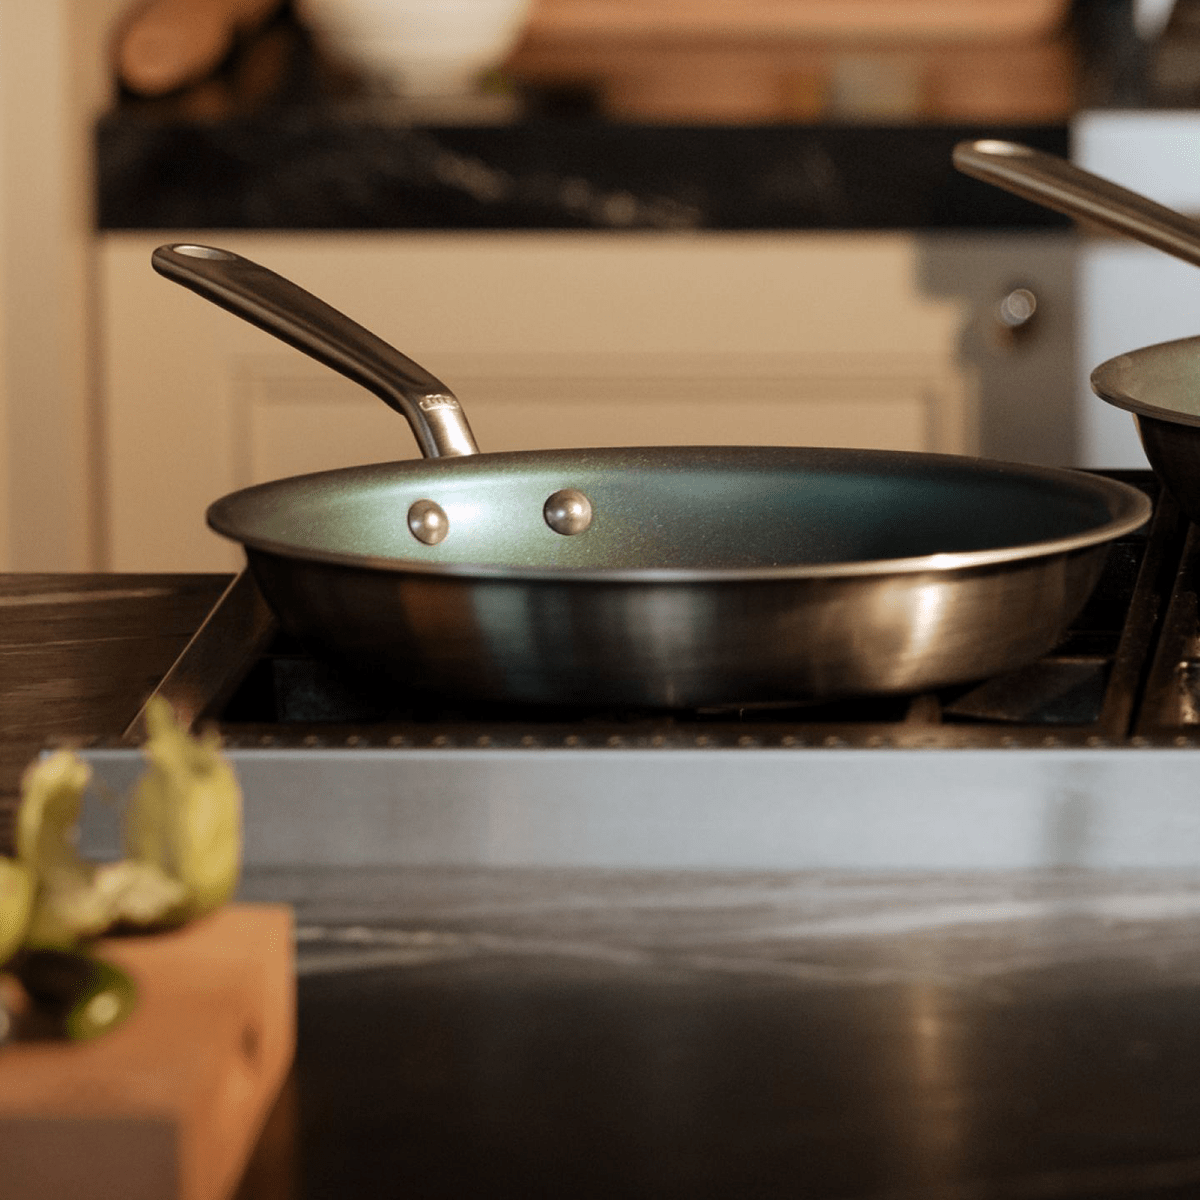 New Colors of the Pioneer Woman's Nonstick Cookware Just Dropped